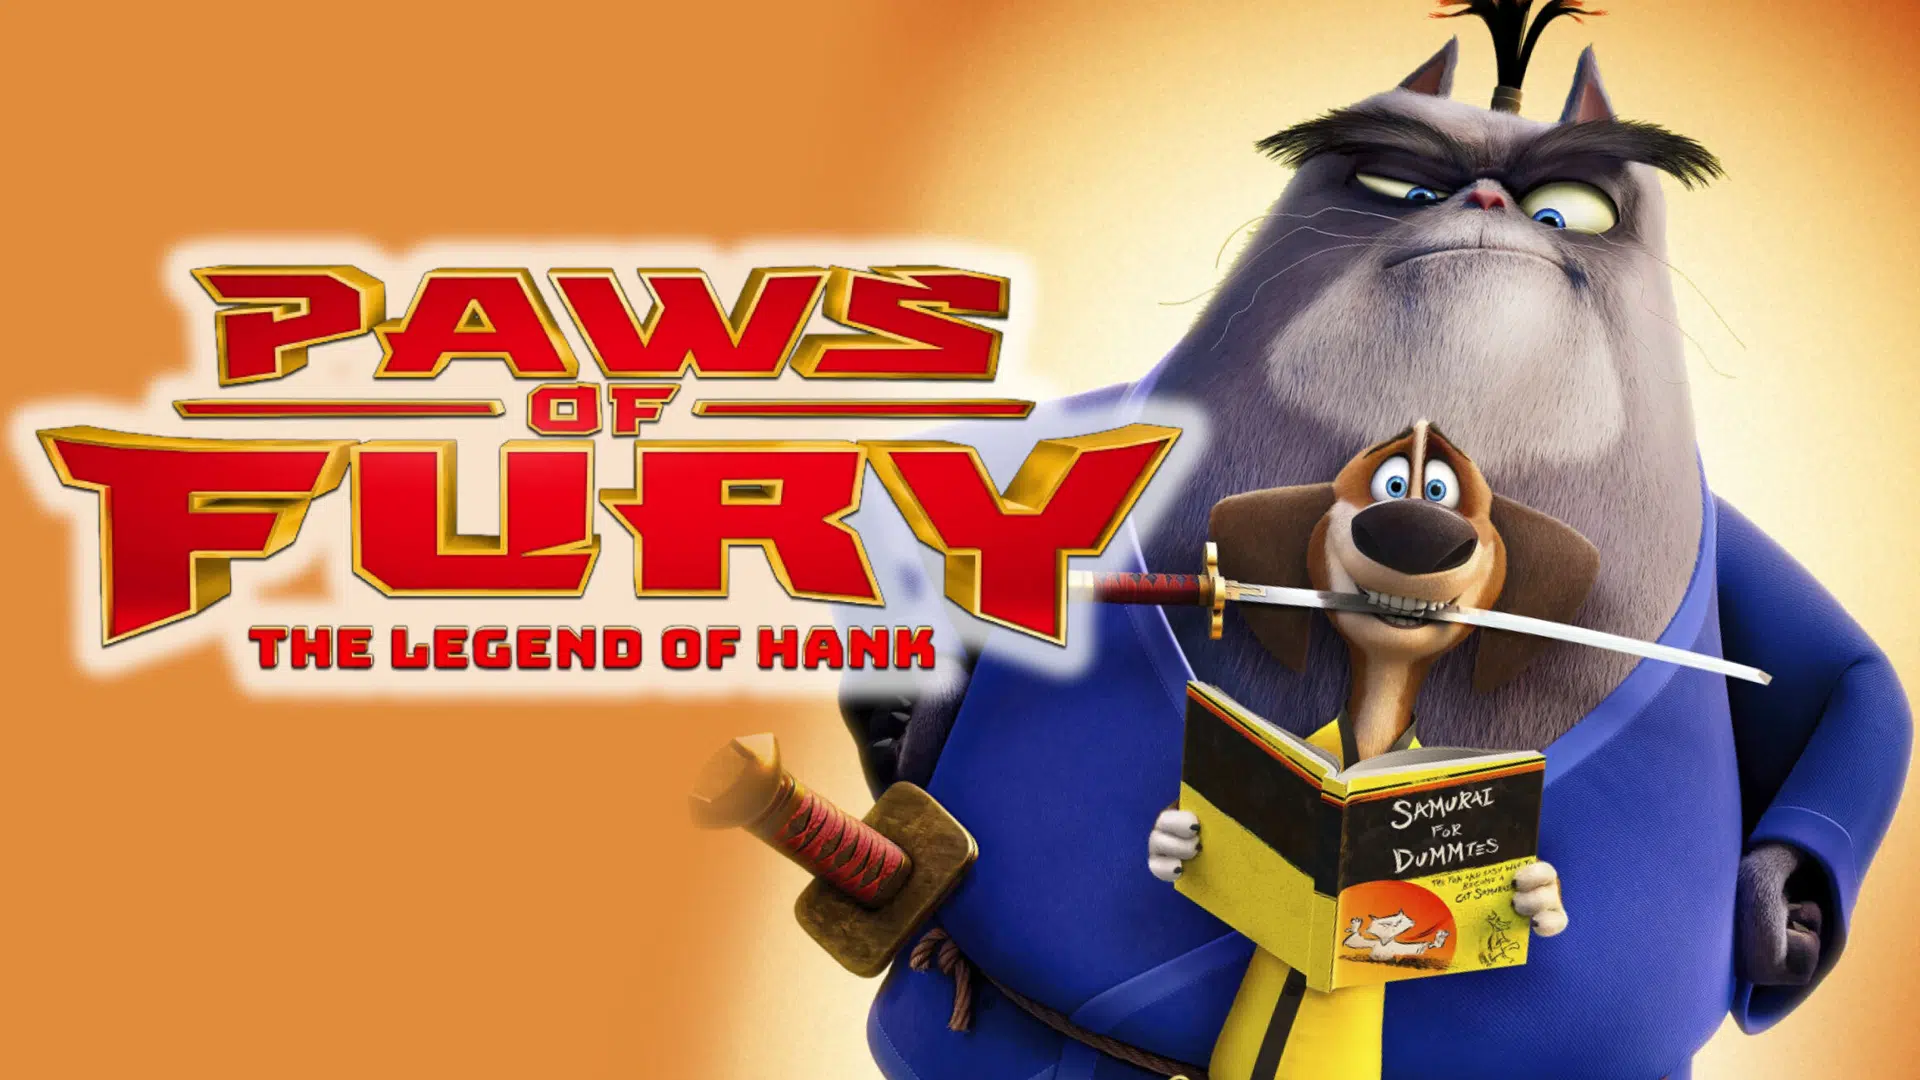 91-Second Movie Review: Paws of Fury: The Legend of Hank